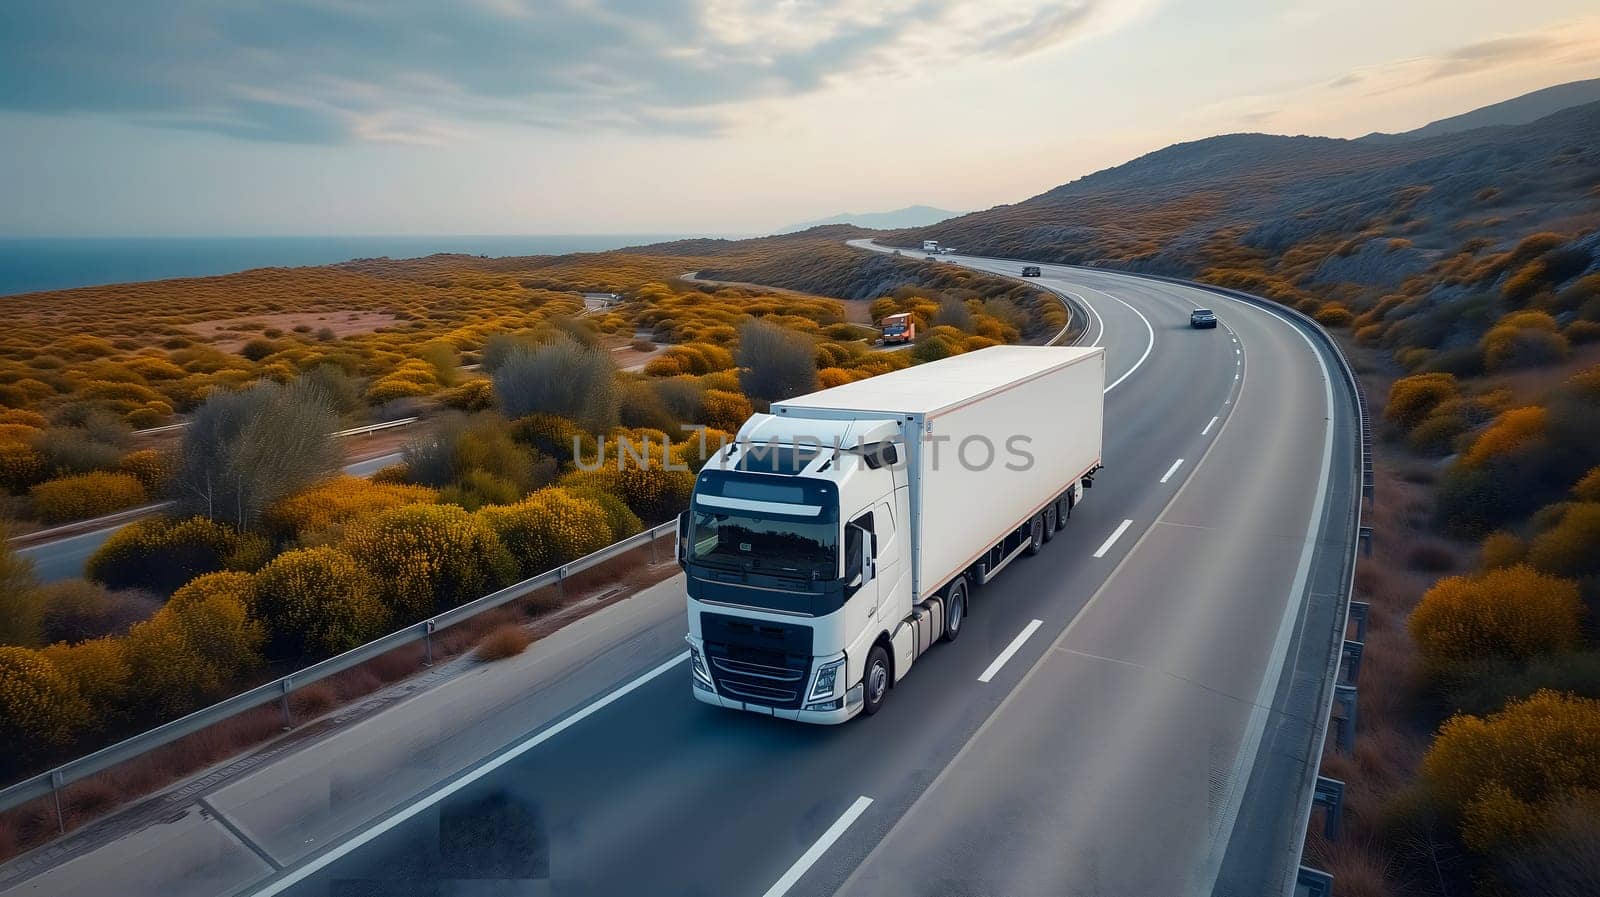 White European semitruck is seen from the sky on a highway backed by vegetation. Neural network generated image. Not based on any actual scene or pattern.